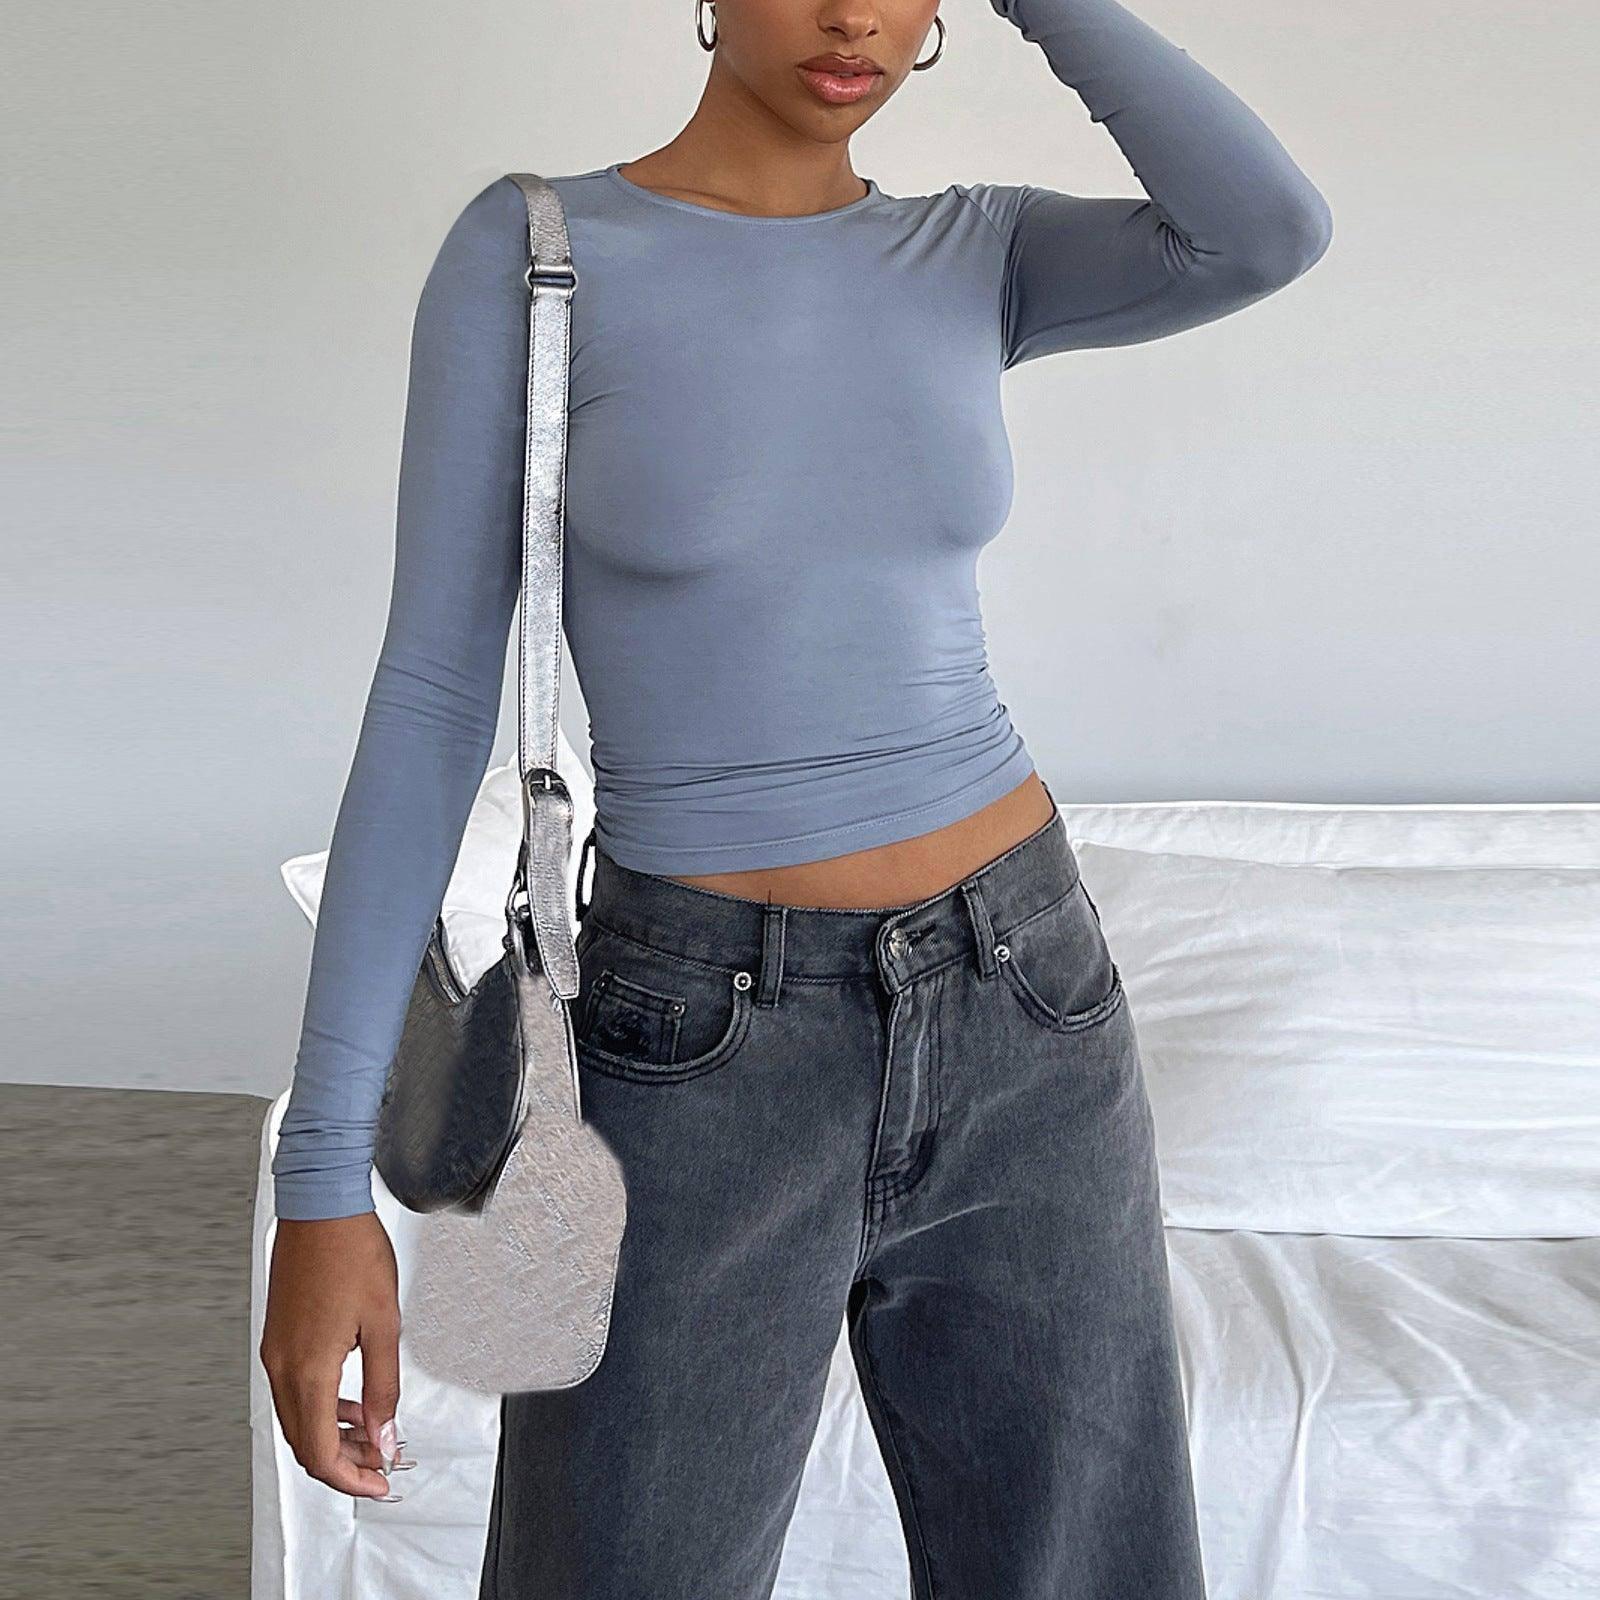 Women's Clothing Fashion Slim Long-sleeved Pullovers Tops-Bluegrey-8